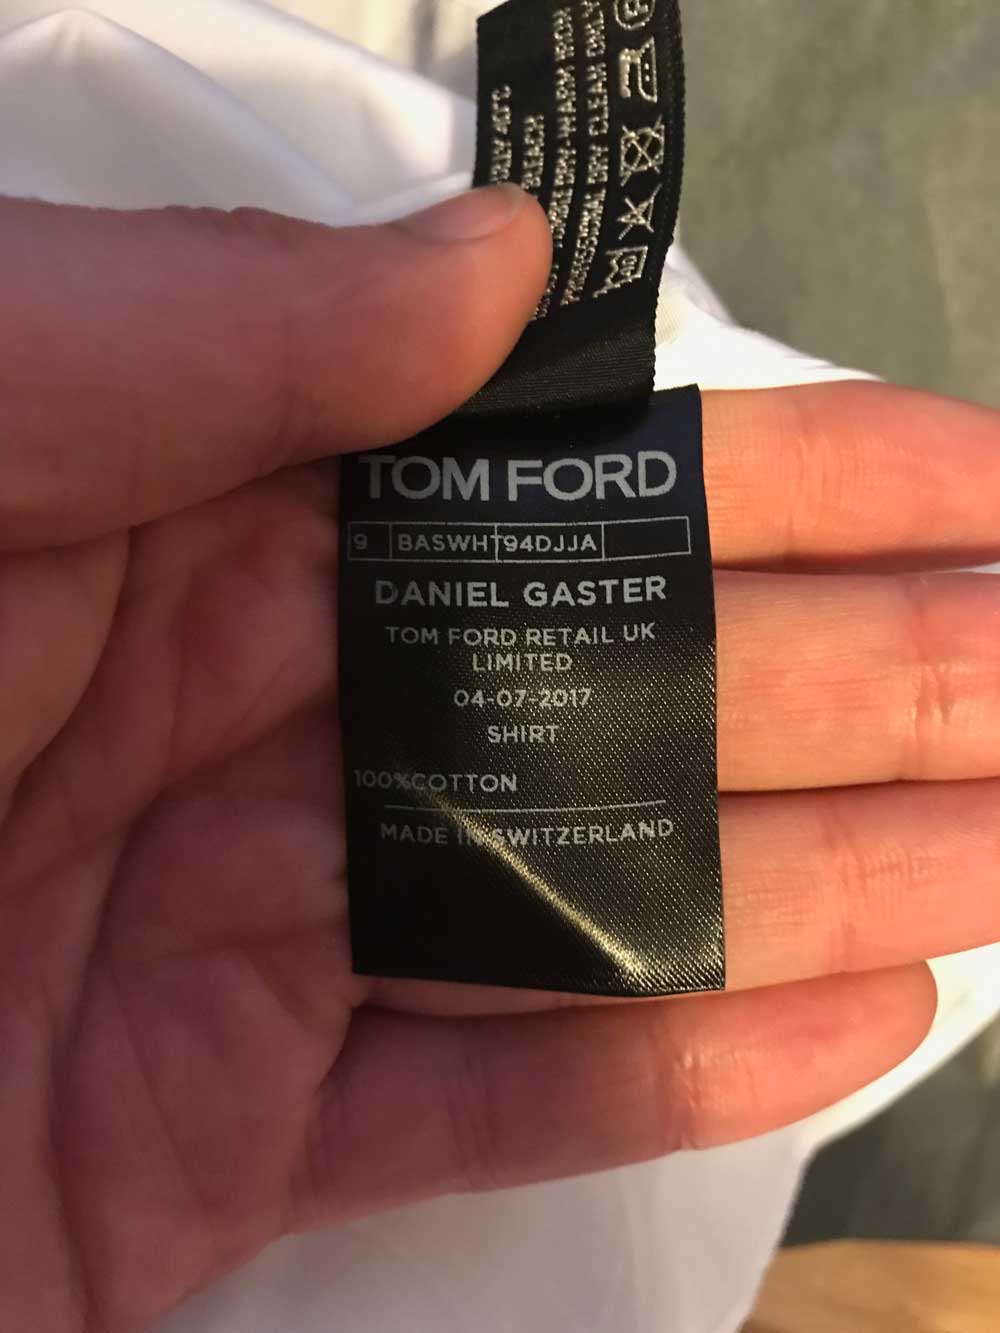 Spectre - The TOM FORD Made to Measure Shirt - Review